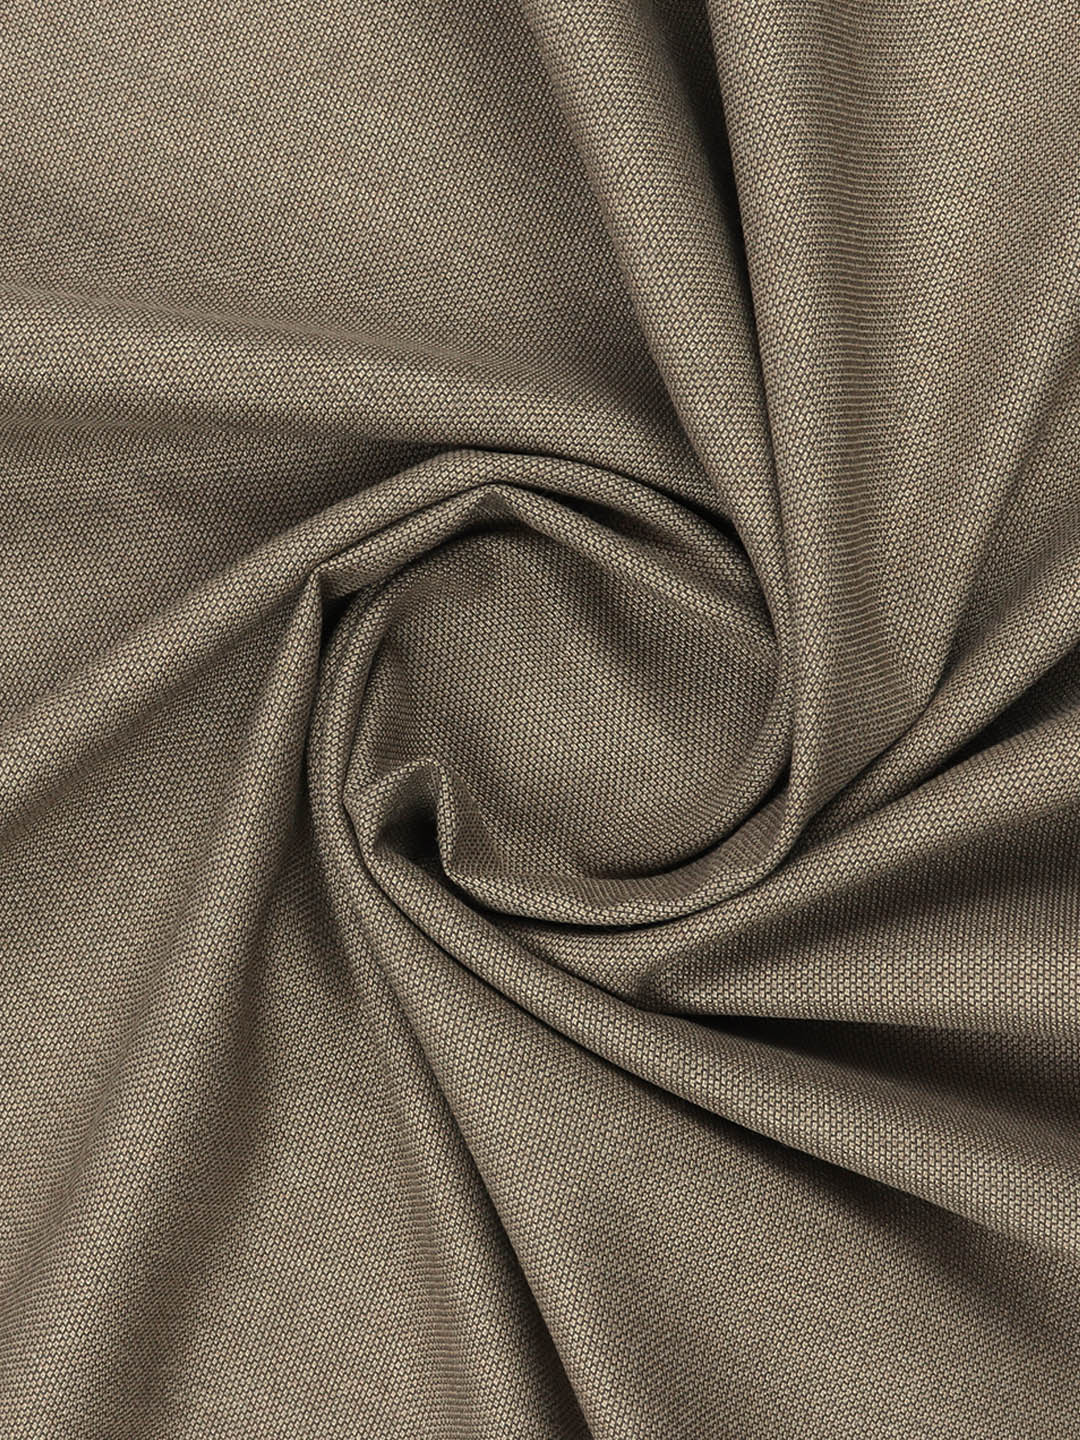 Cotton Super Stretch Brown Suiting Fabric-Icle Stretch